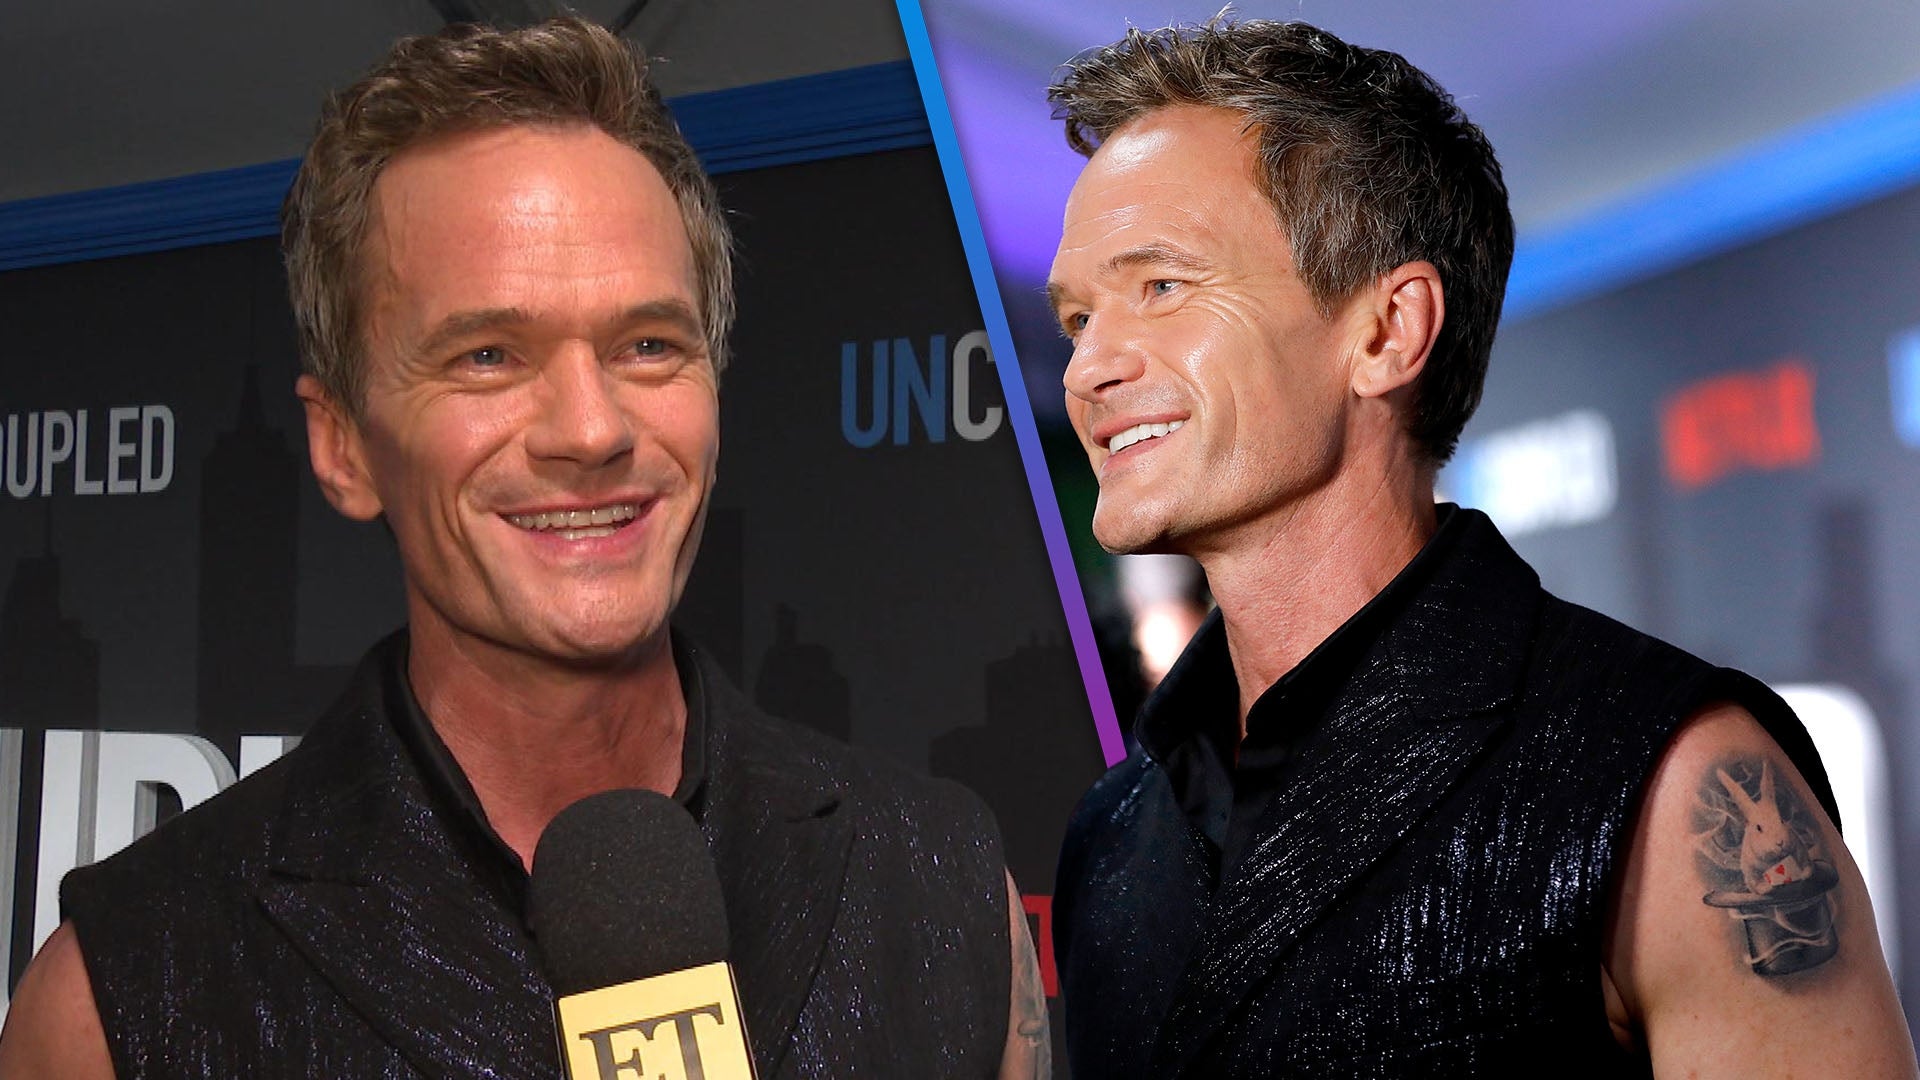 Neil Patrick Harris Shows Off New Arm Tattoo at ‘Uncoupled’ Premiere (Exclusive)